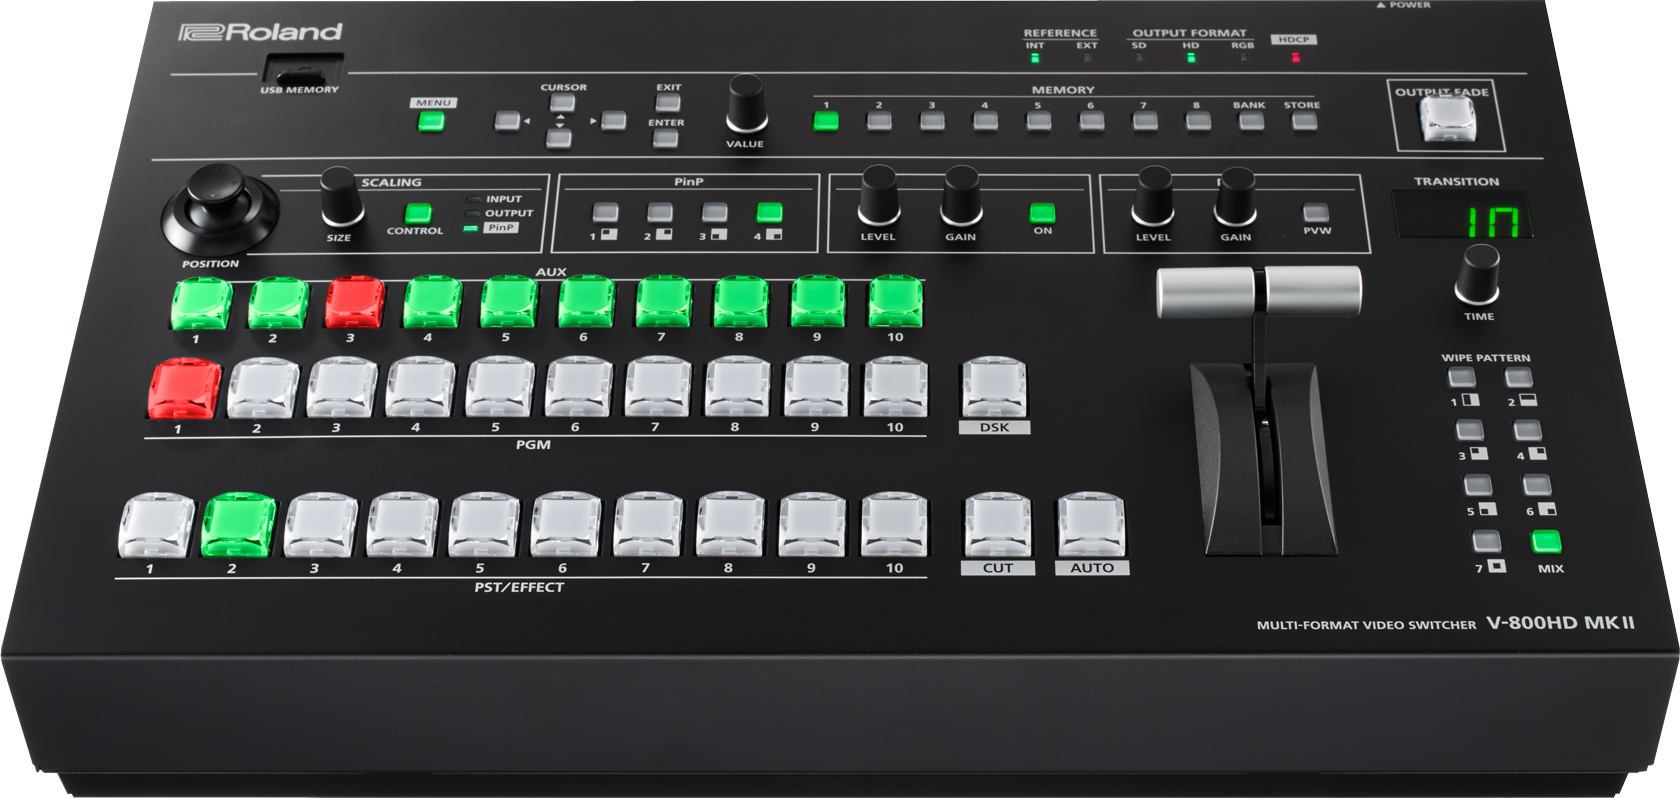 Roland V-800HD MKII - Professional Multi-Format Video Switcher